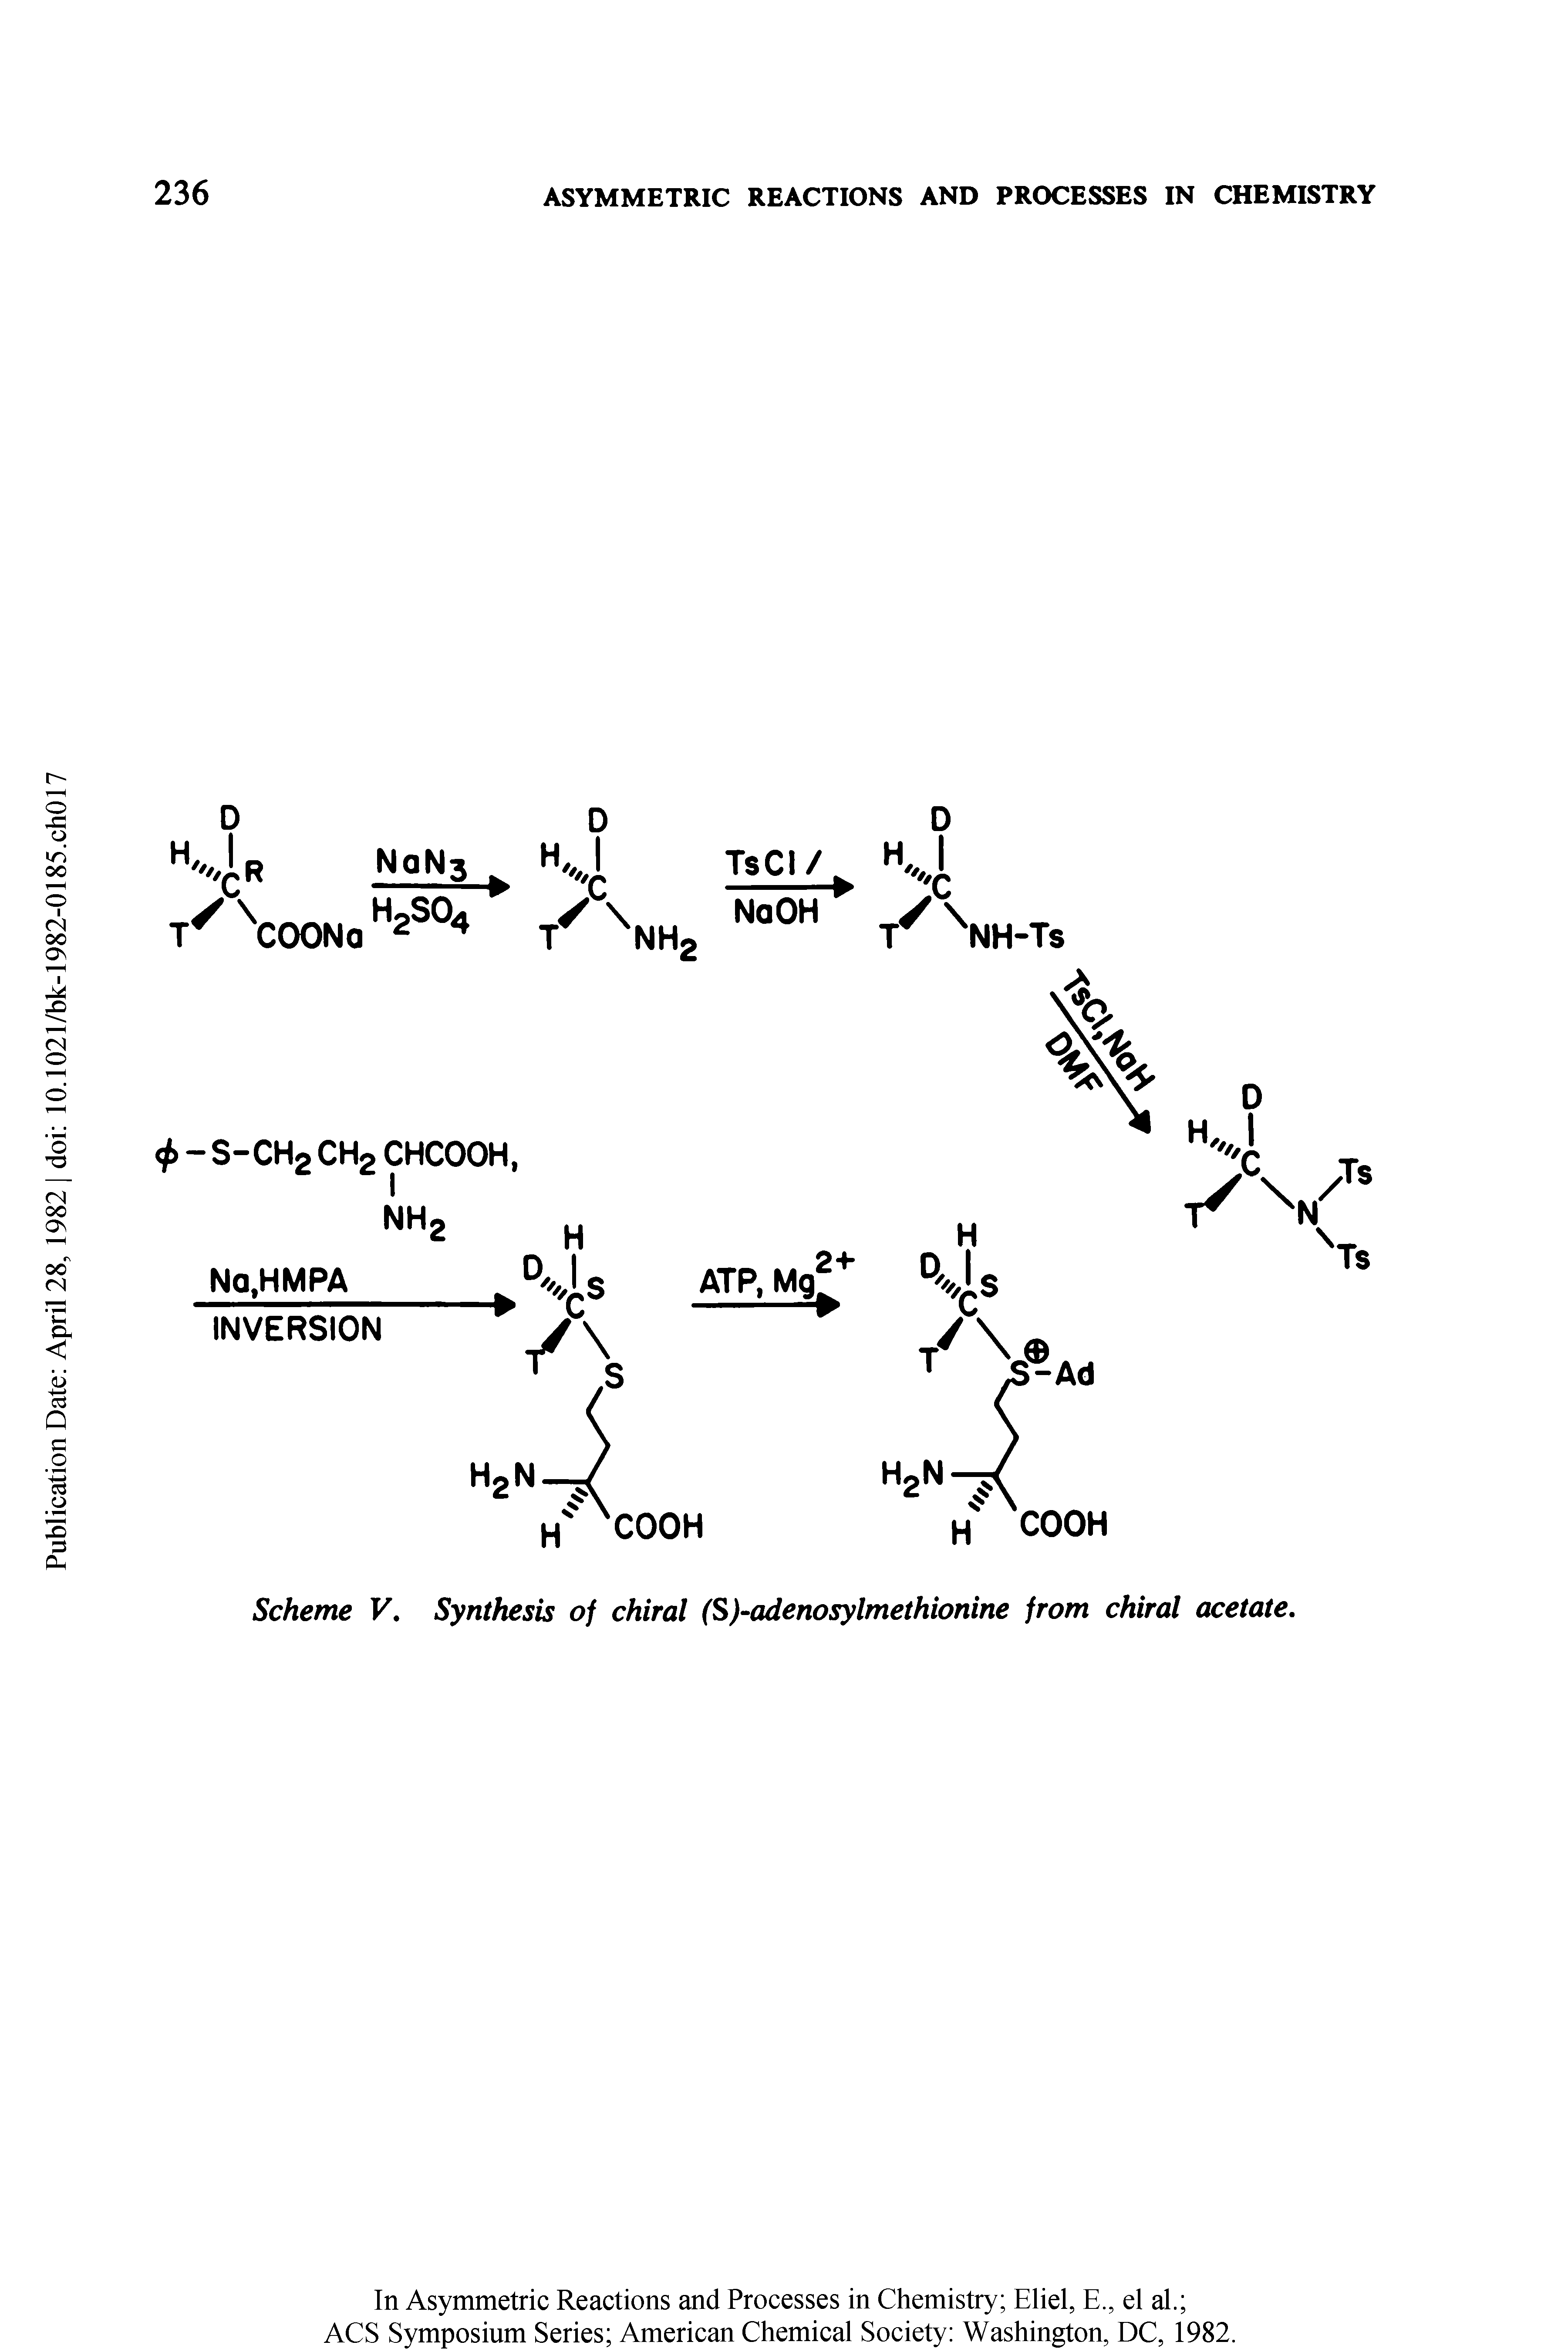 Scheme V, Synthesis of chiral (S)-adenosylmethionine from chiral acetate.